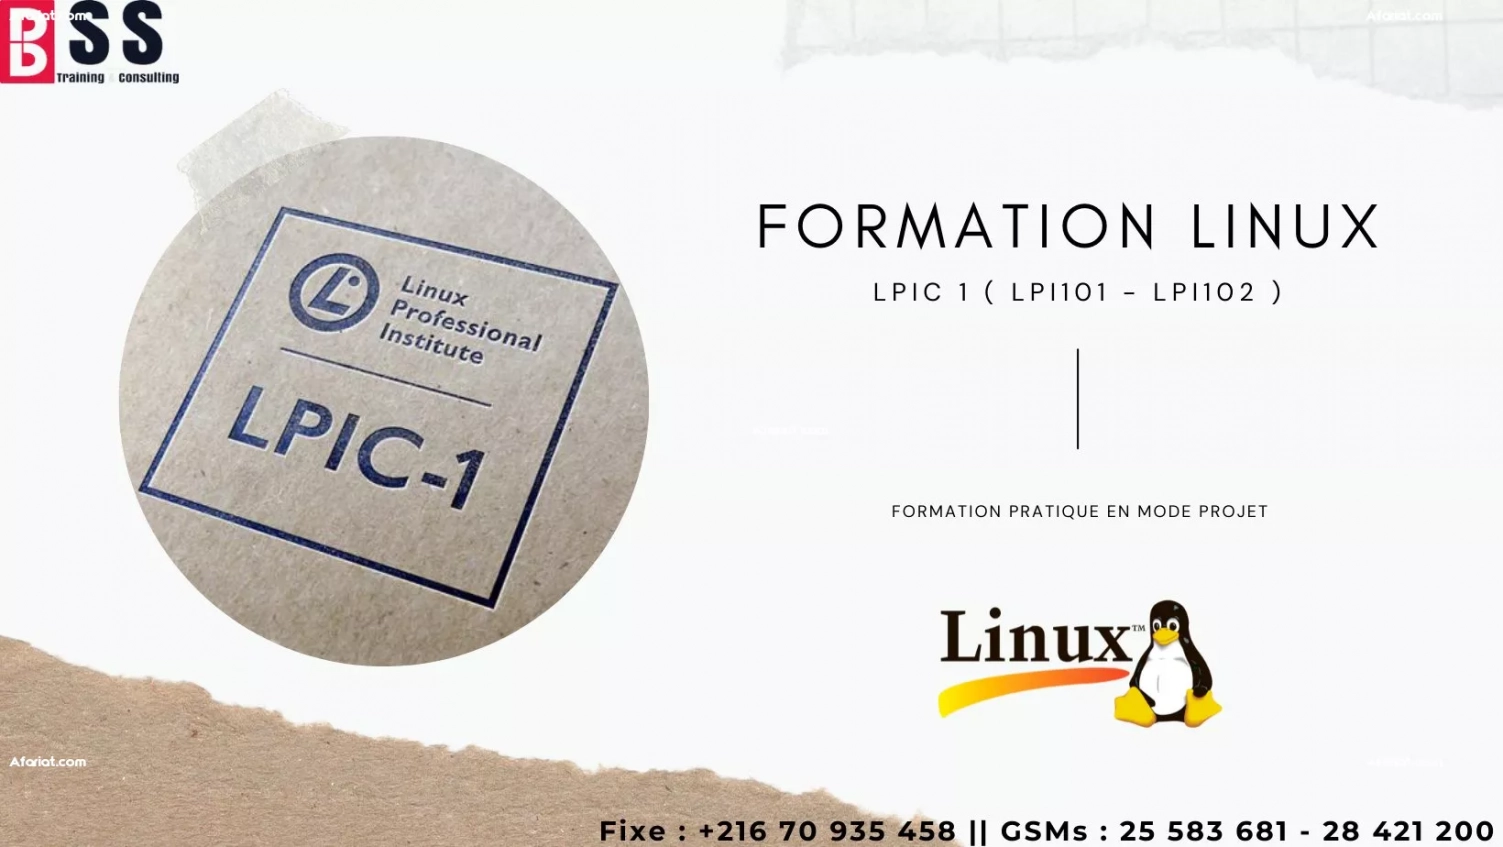 FORMATION LINUX LPIC 1